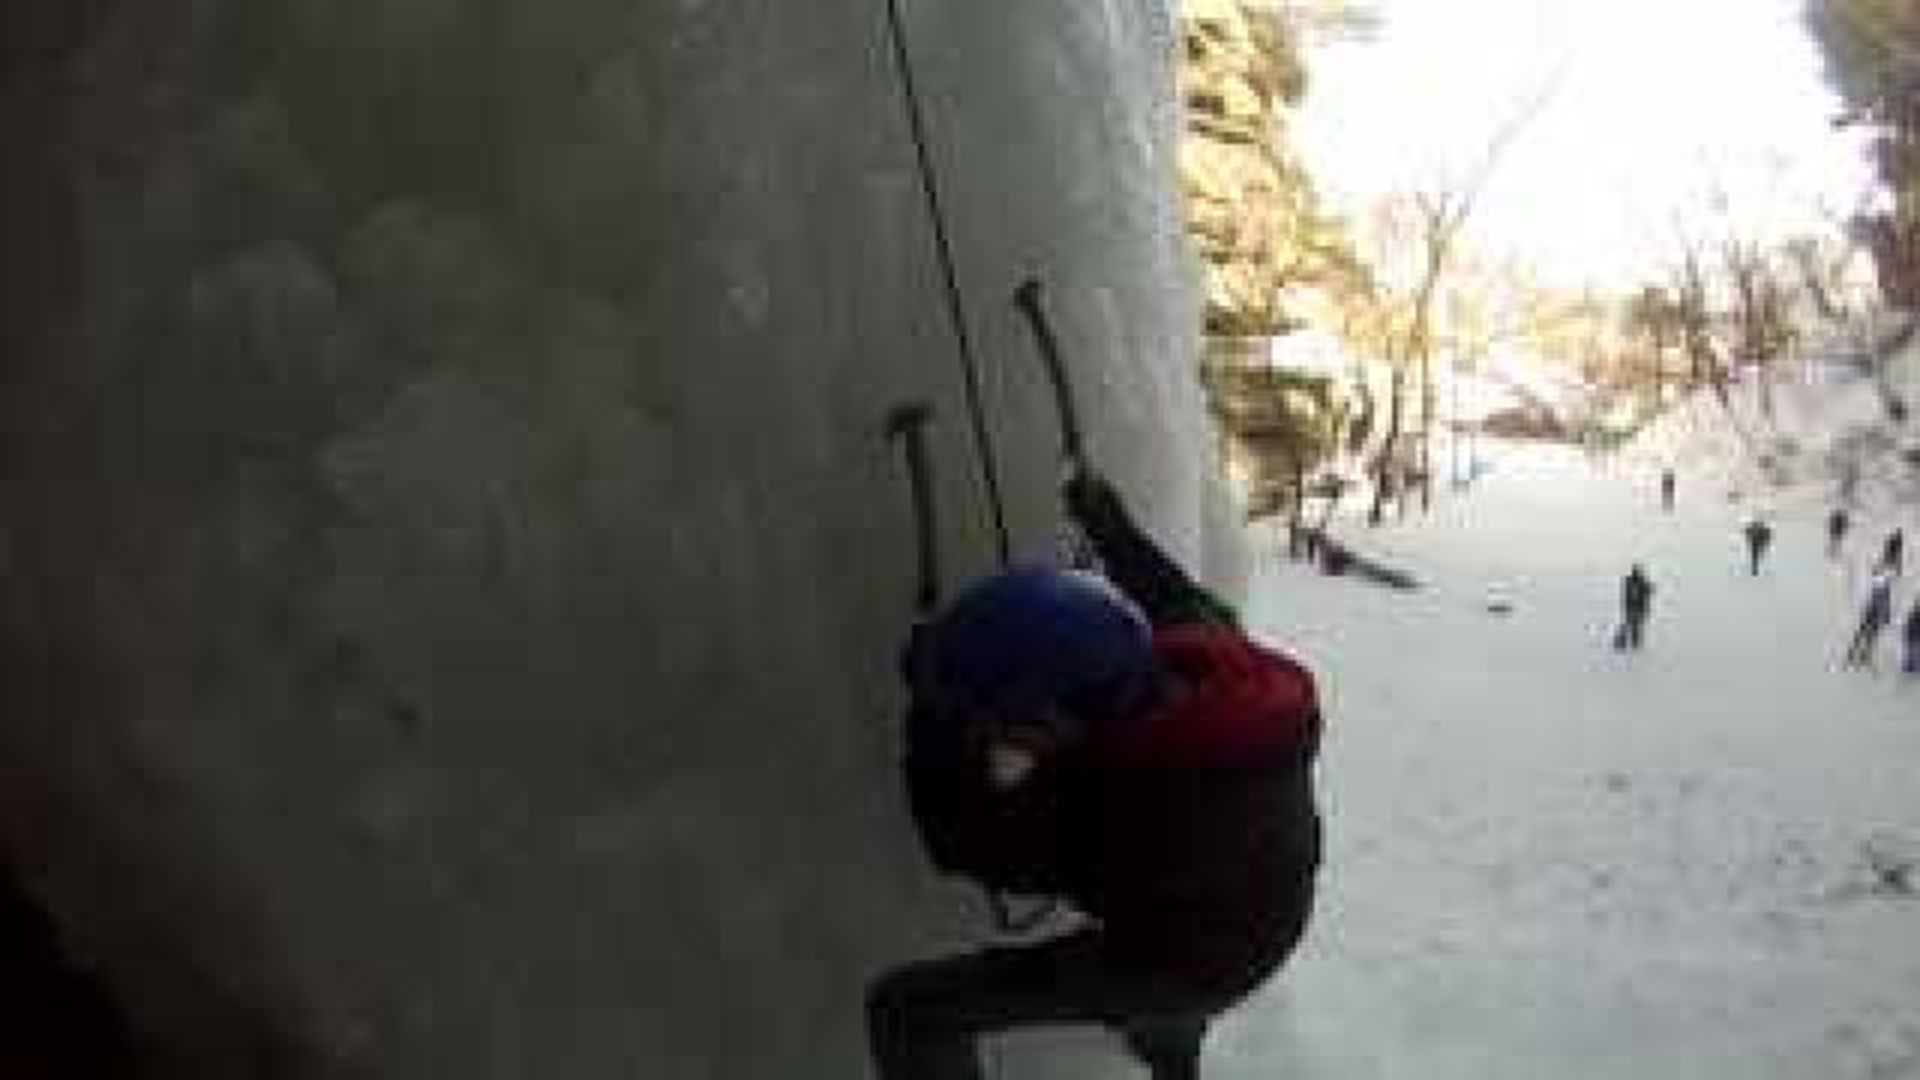 WEB EXCLUSIVE the media cannot ice climb